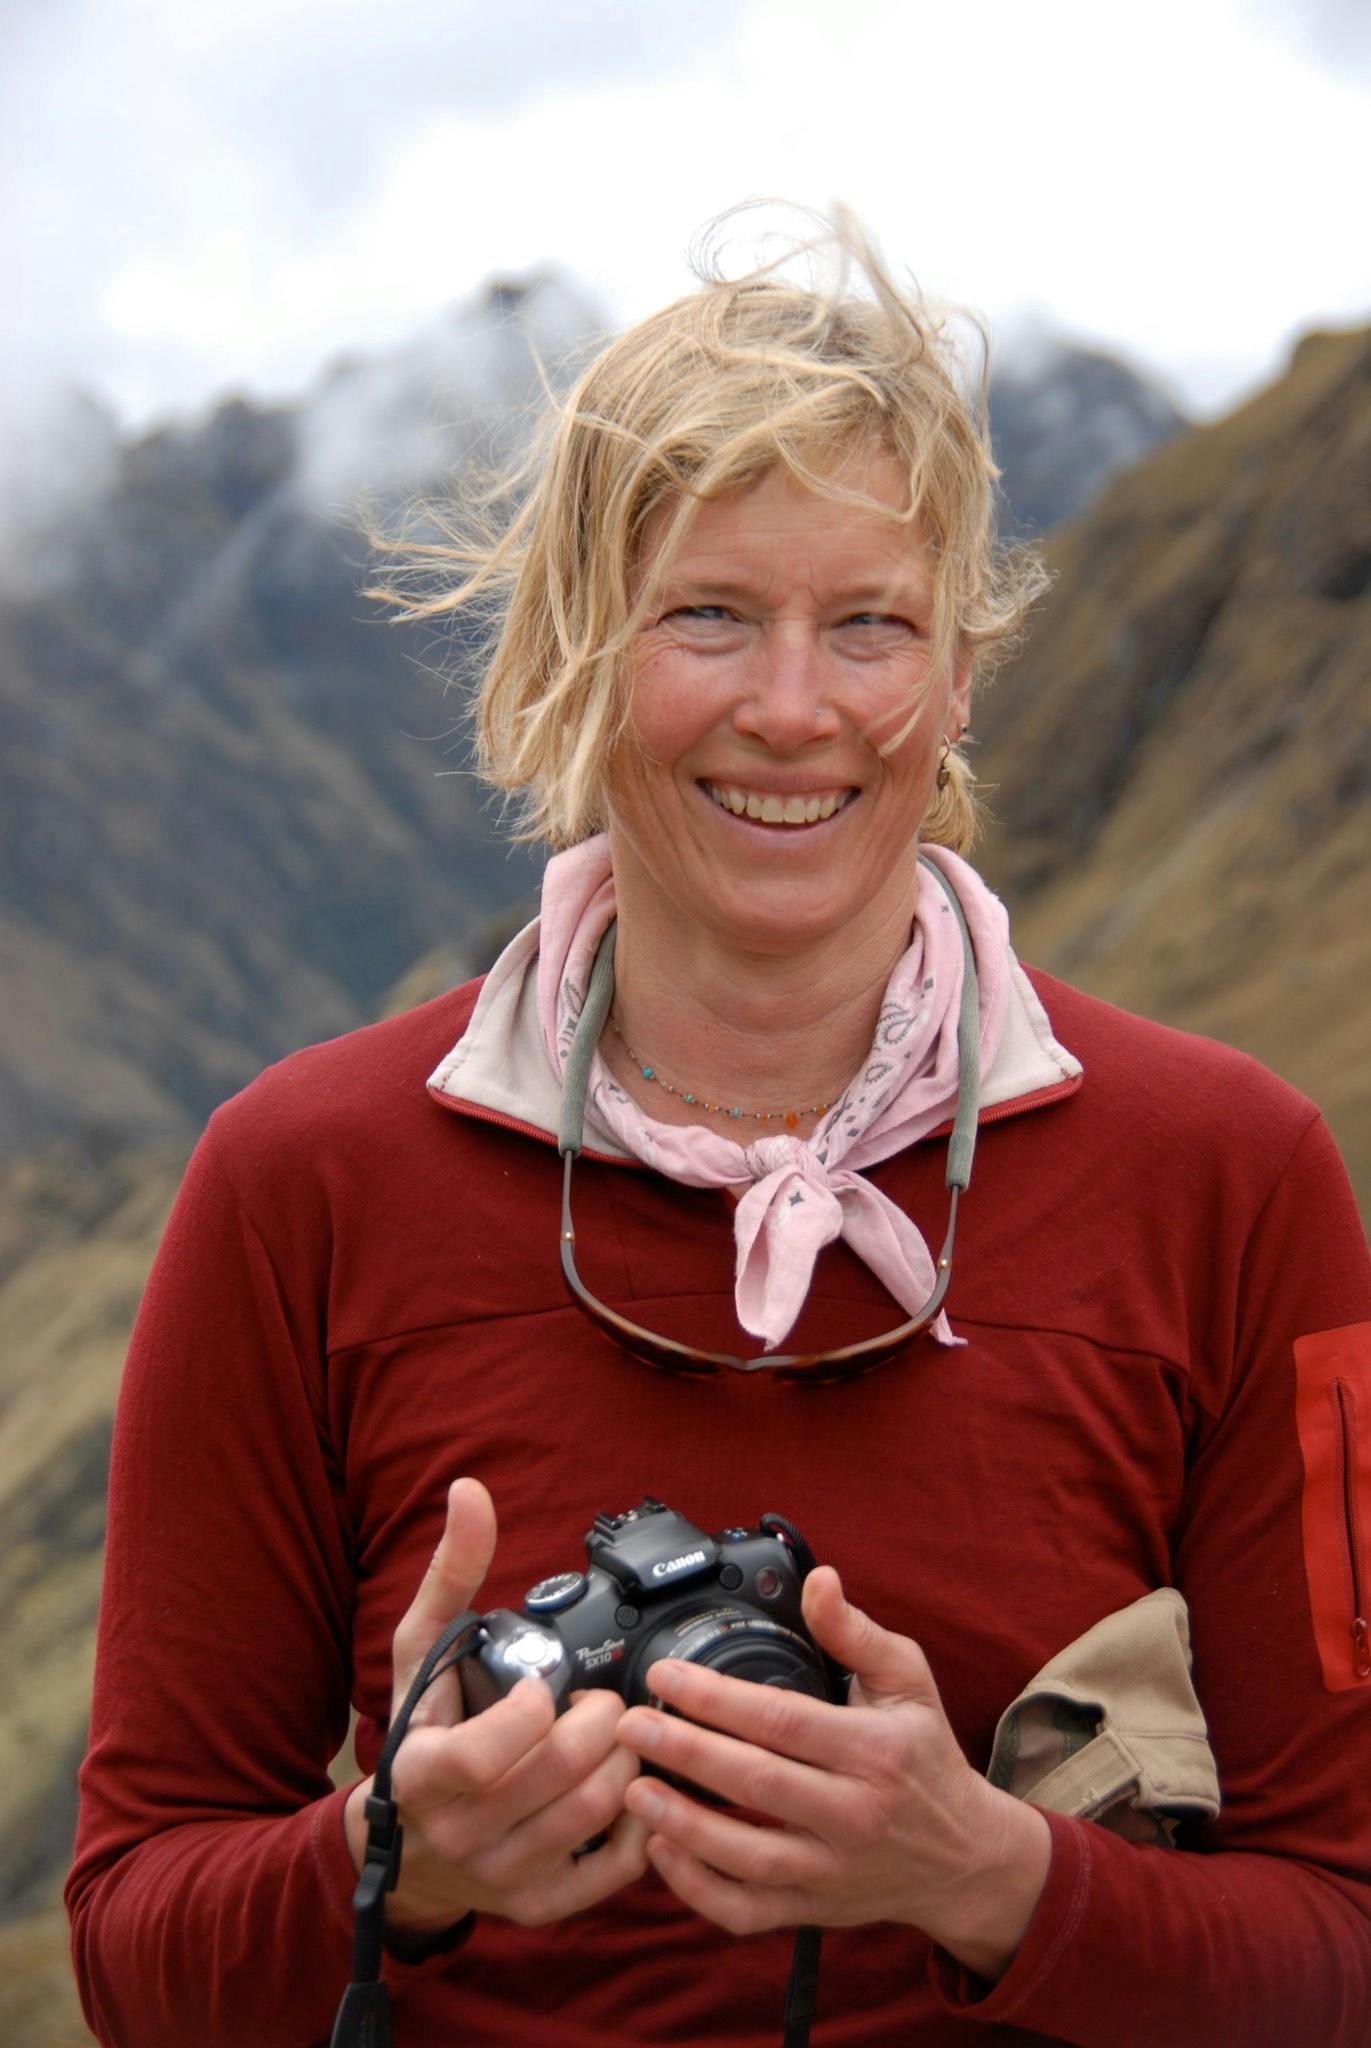 Jennifer Royall smiling while holding a camera in the mountains.